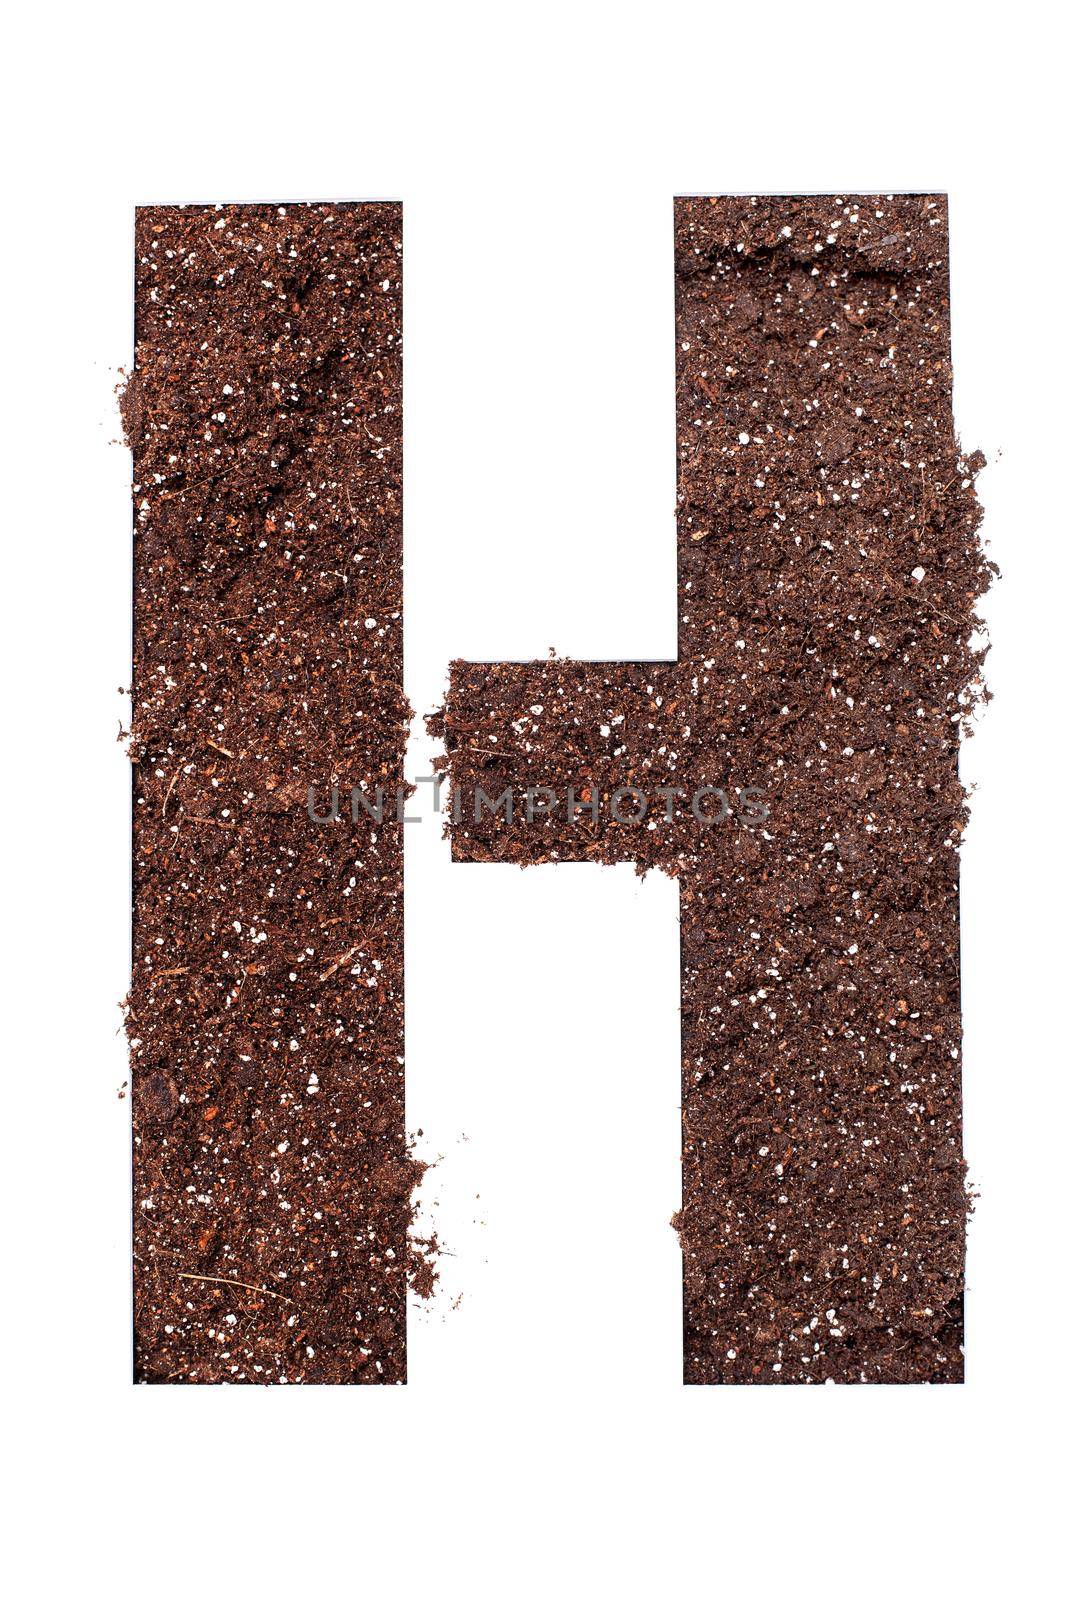 stencil letter H made above dirt on white surface